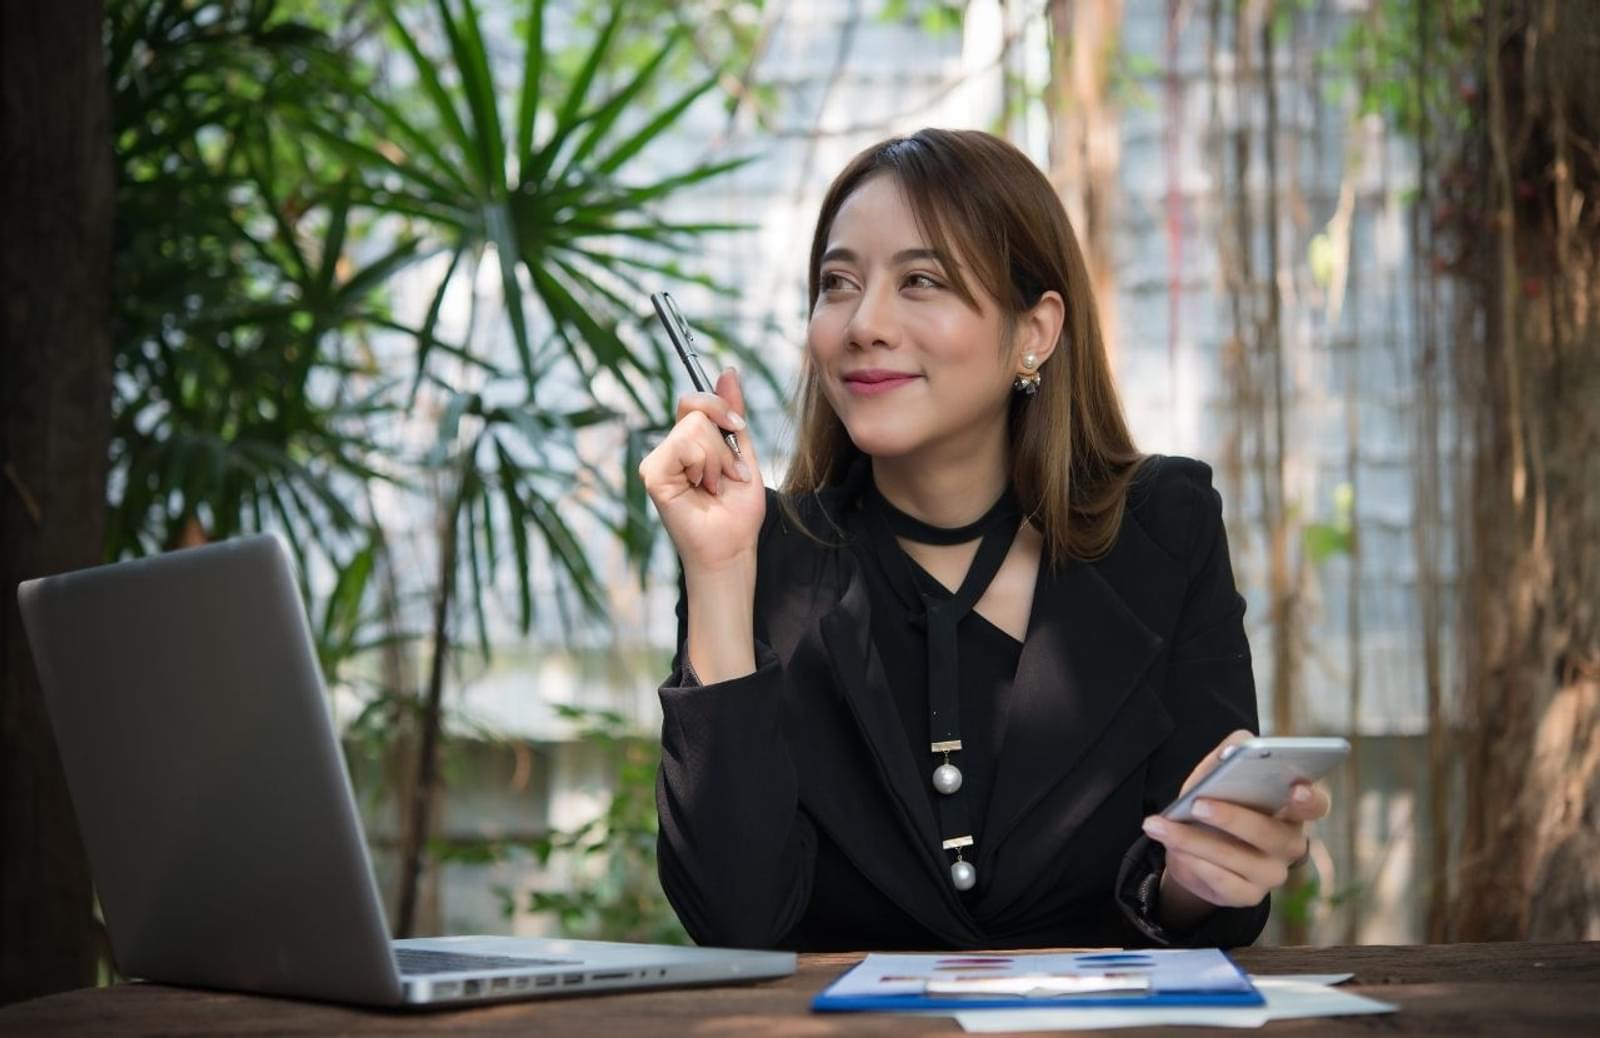 Woman at desk holding cellphone with open laptop